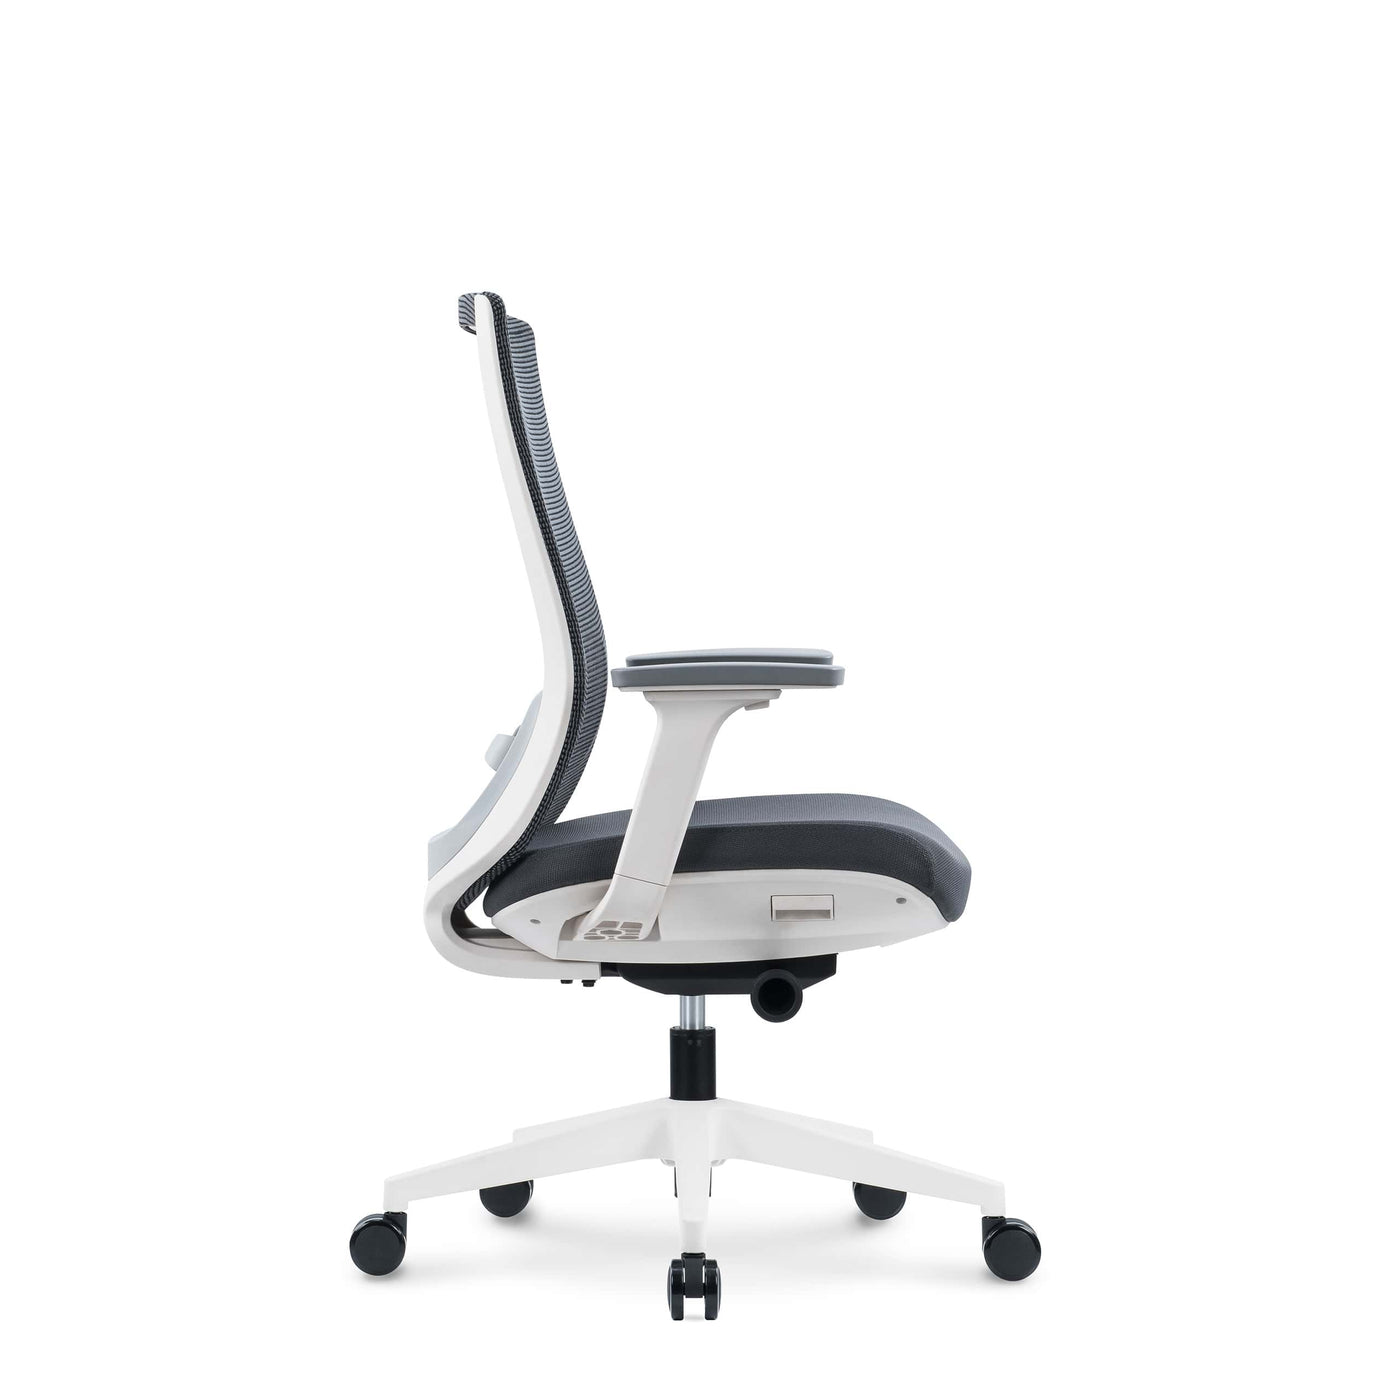 i8 Pure Home Office Chair | Ergonomic Office Chair | Fully Adjustable Ergonomic Home Office Chair | Home Office Furniture